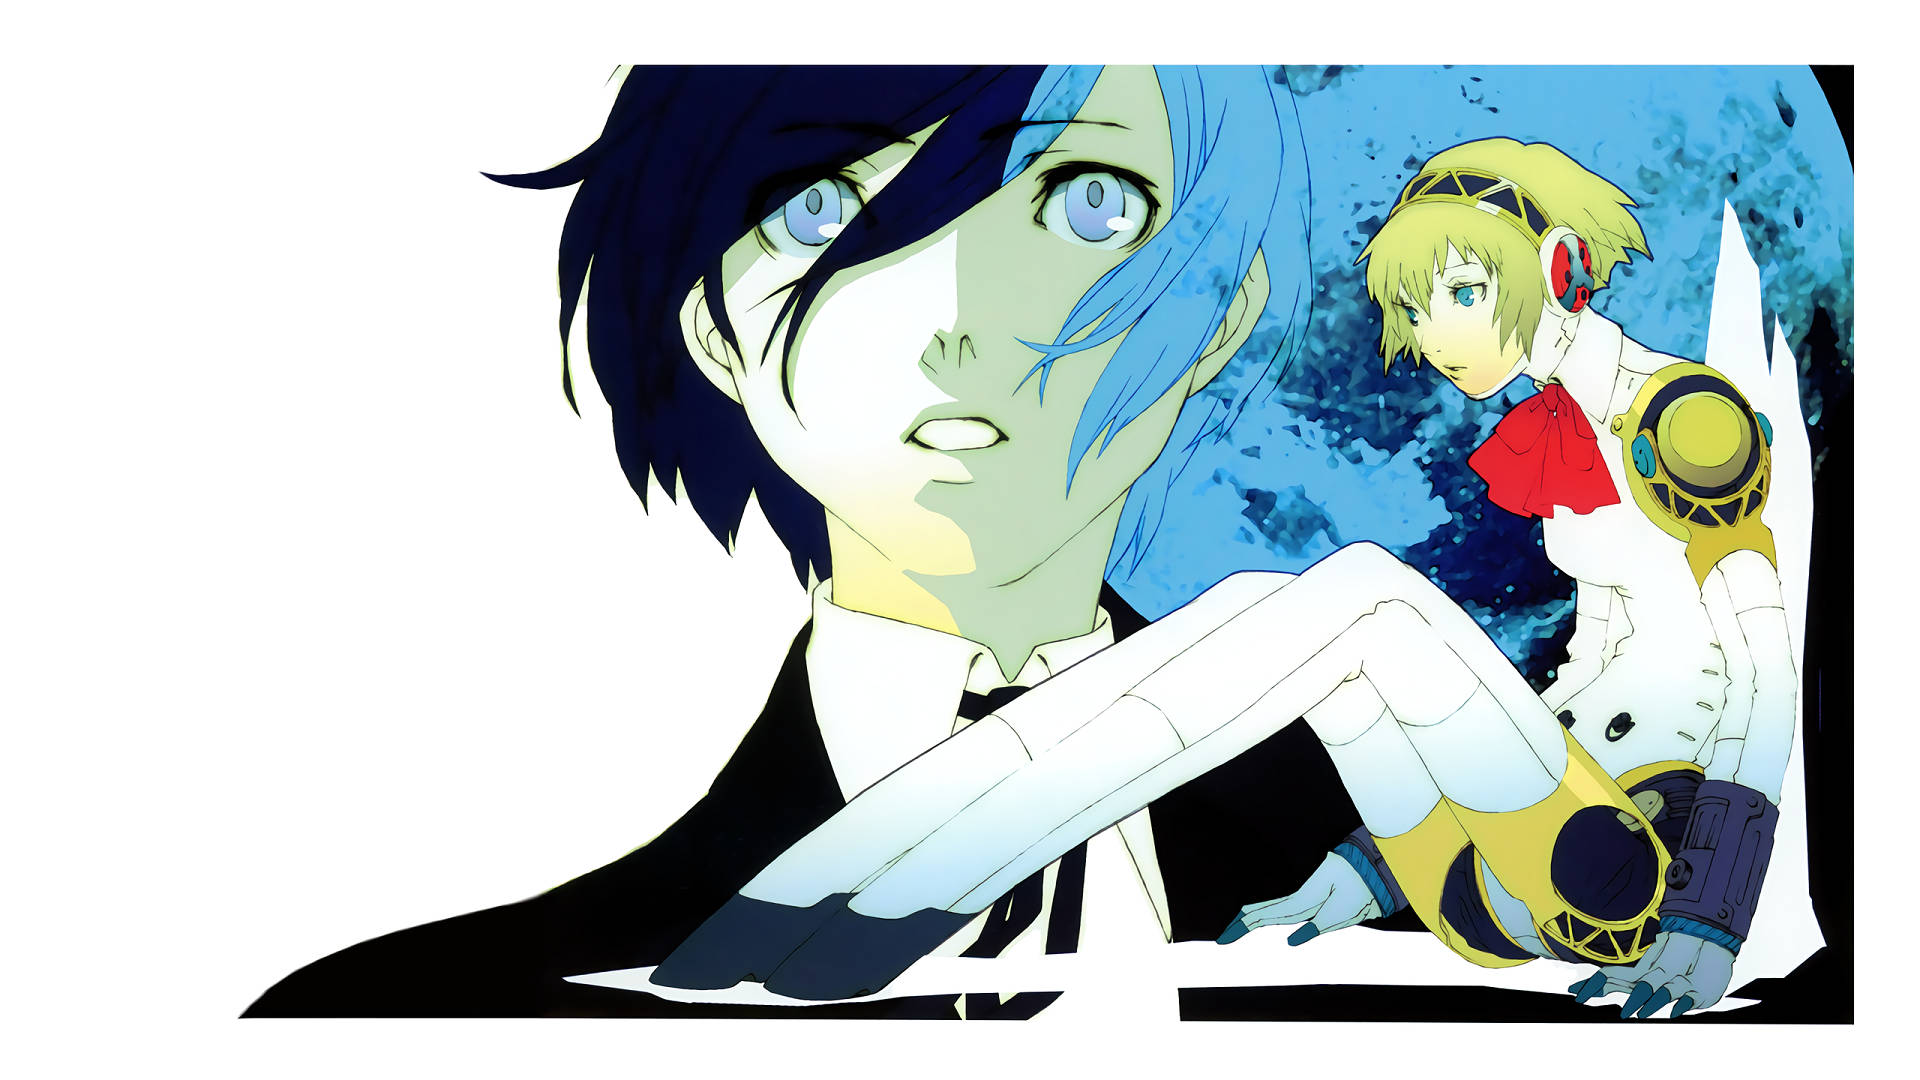 Meet Makato Yuki and Aigis, the unlikely duo of Persona 3. Wallpaper